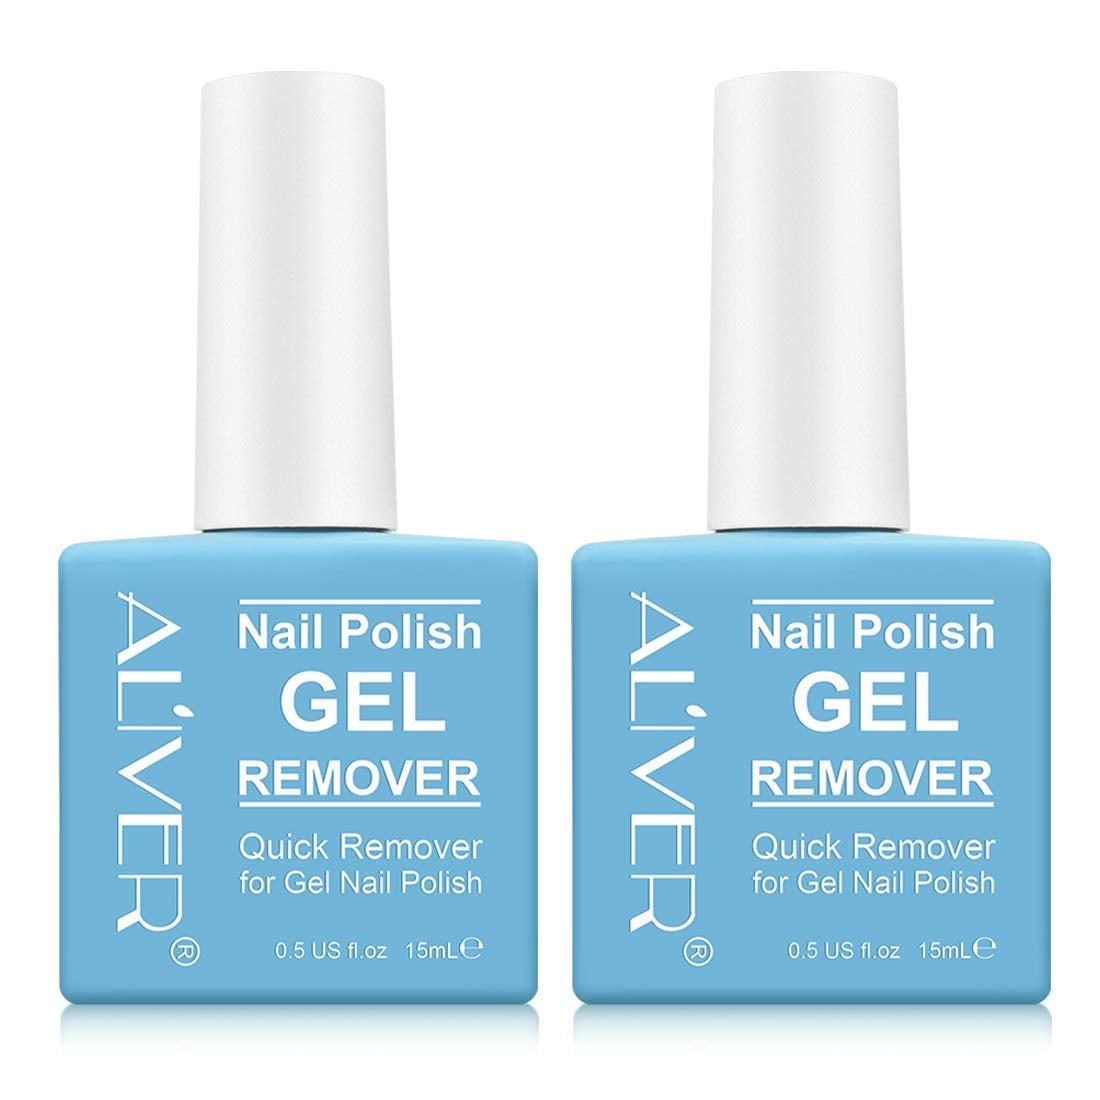 Aliver Gel Nail Polish Remover Review With Pictures | POPSUGAR Beauty